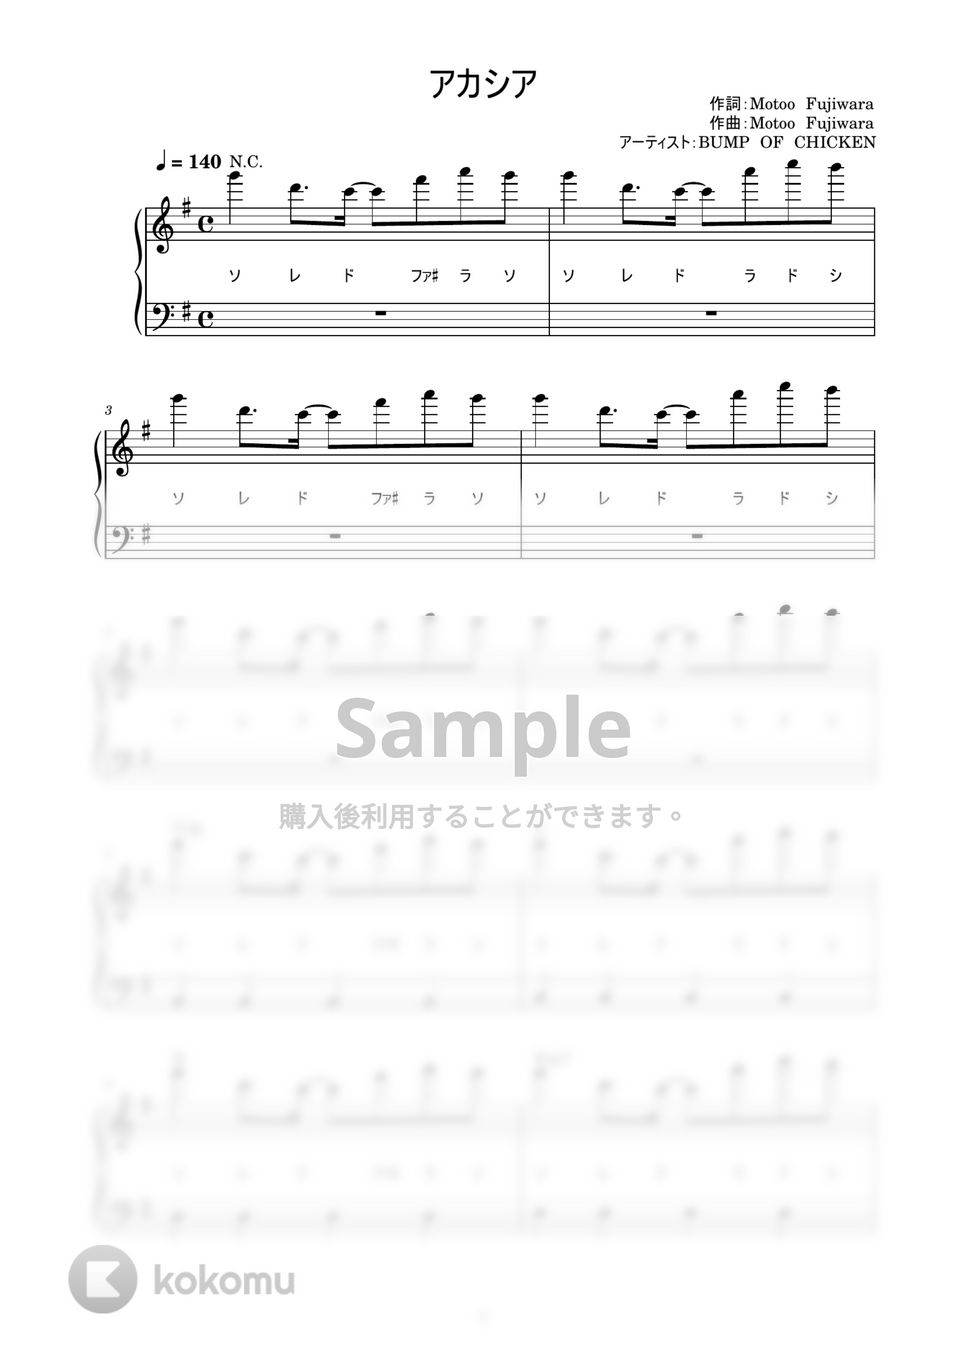 BUMP OF CHICKEN - アカシア (かんたん / 歌詞付き / ドレミ付き / 初心者) by piano.tokyo